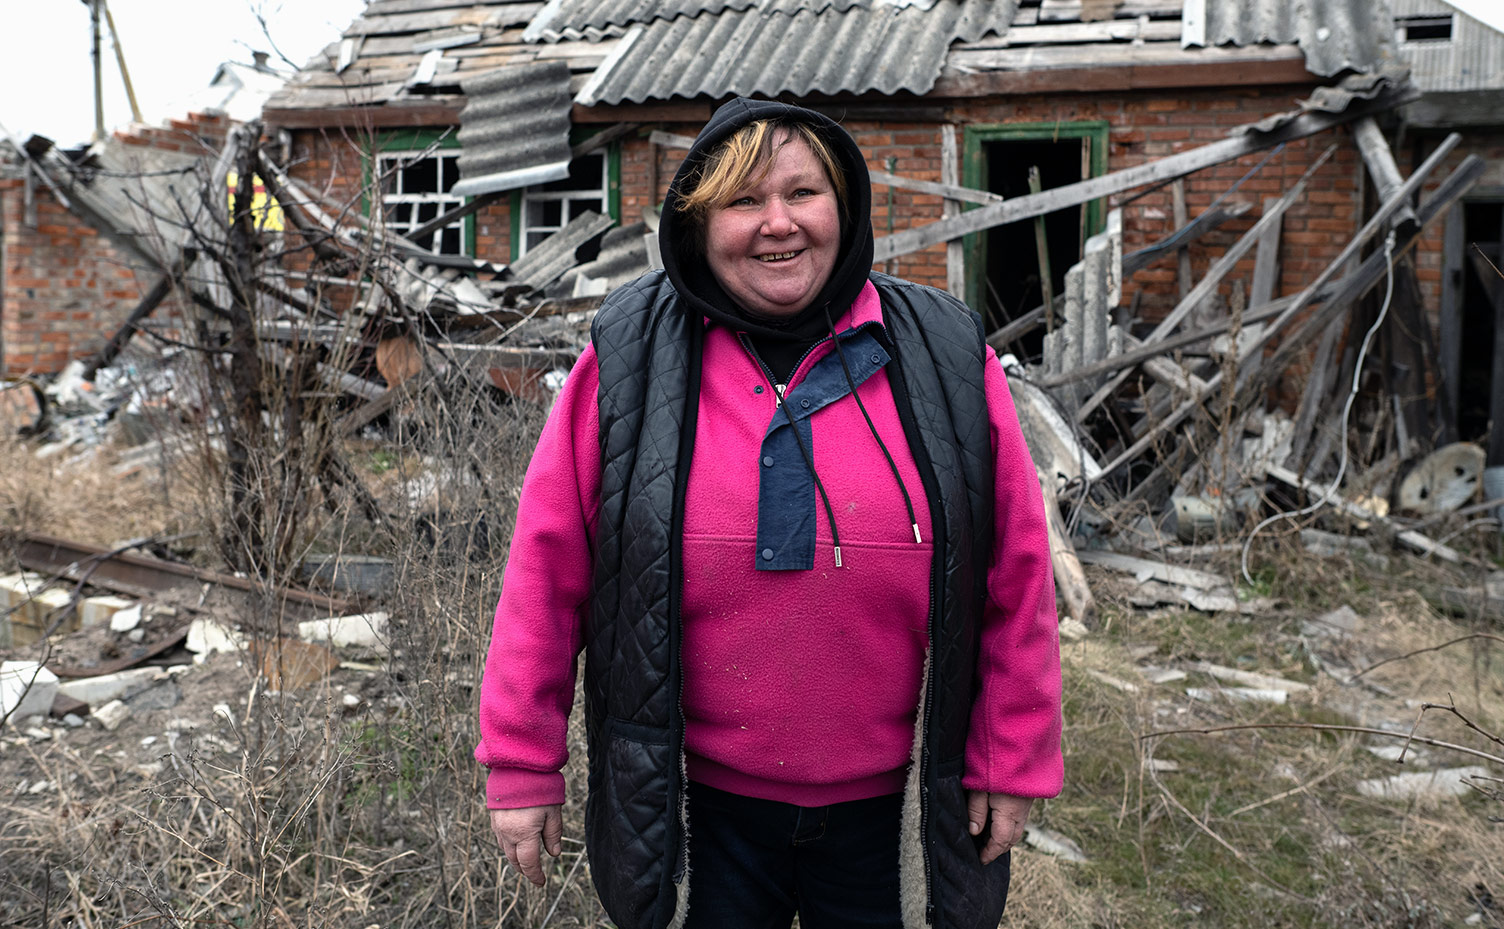 Olga stands in front of her property ruined by war.